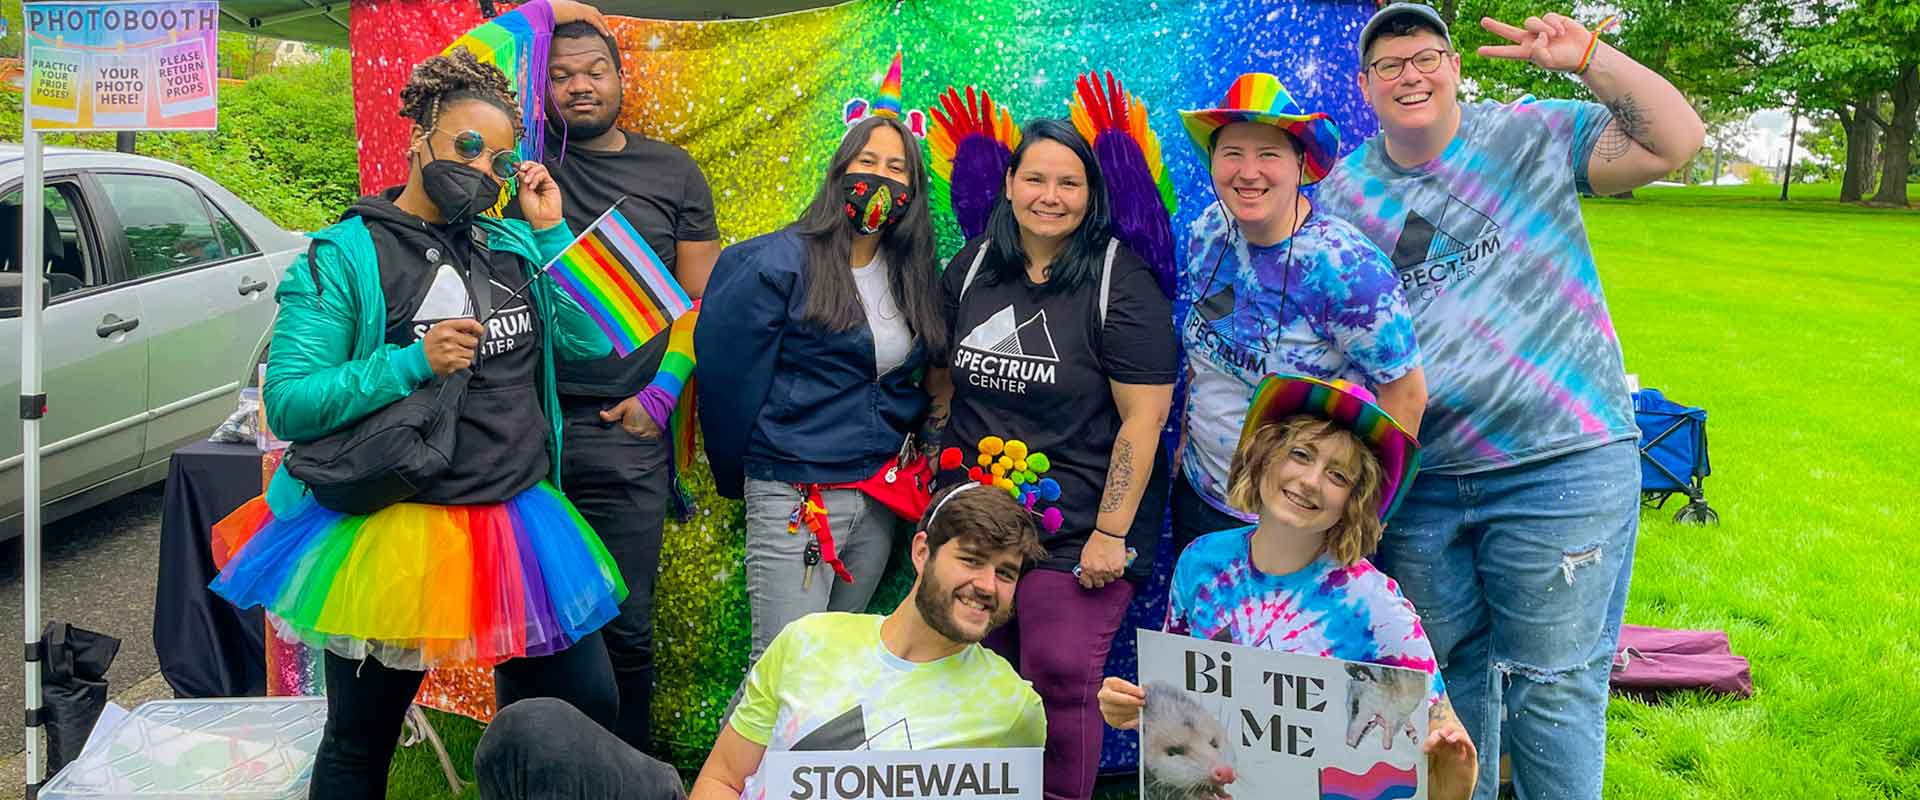 [Systems Change] A group of eight people in bright colors and holding signs posing for a photo in celebration of Pride.